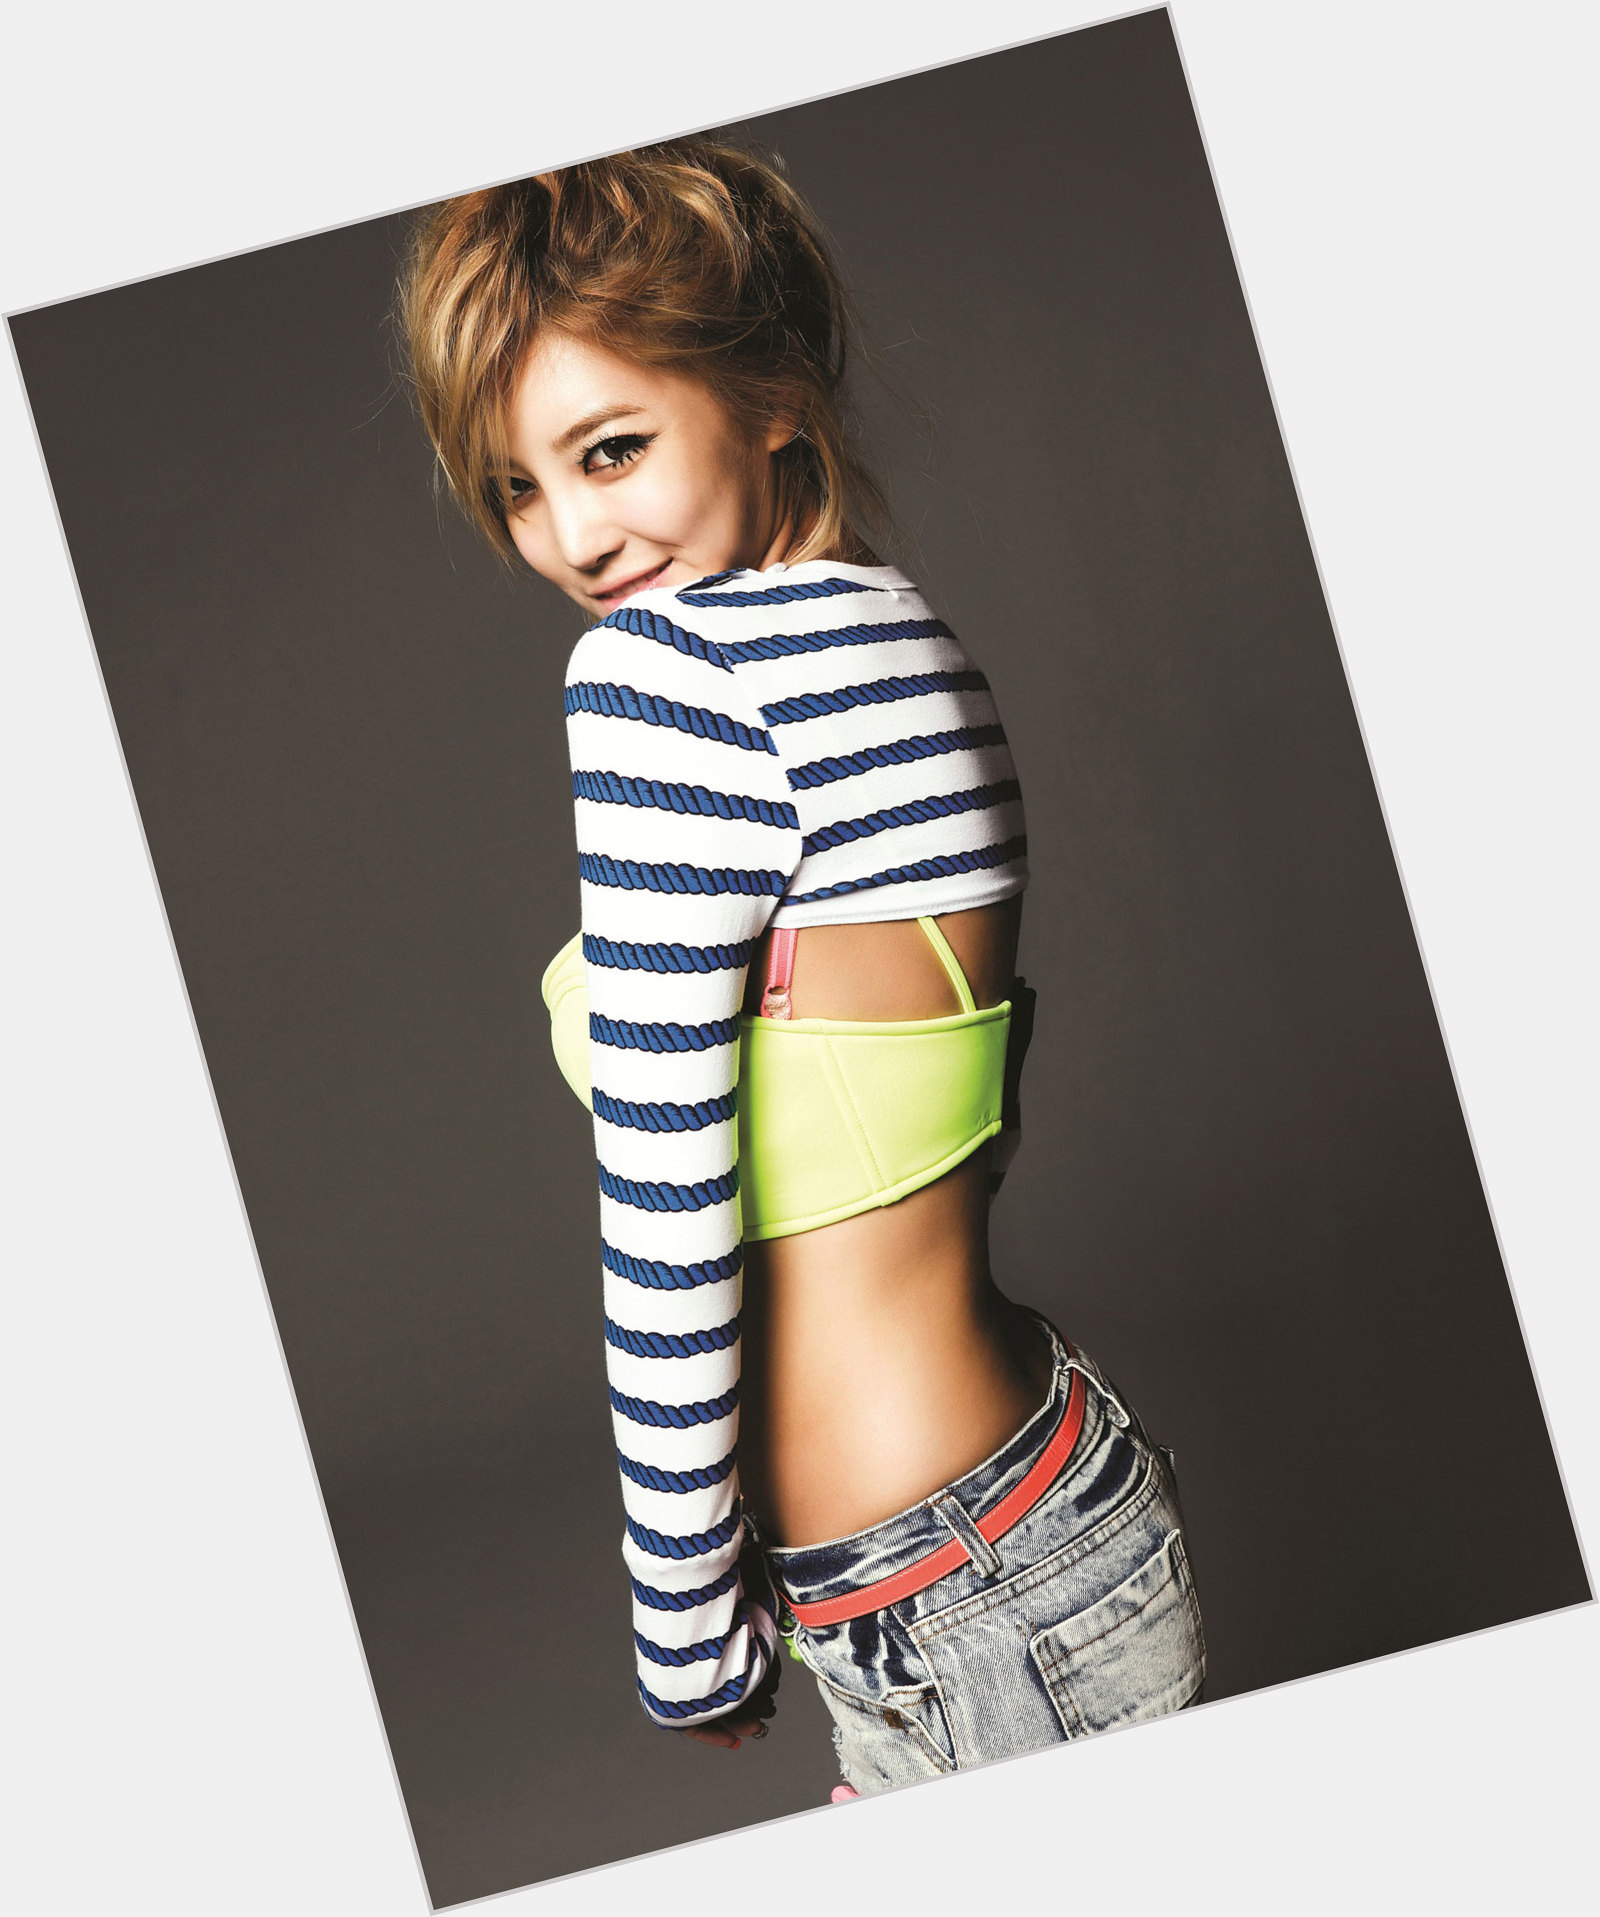 <a href="/hot-women/ns-yoon-g/where-dating-news-photos">Ns Yoon G</a> Slim body,  dyed brown hair & hairstyles